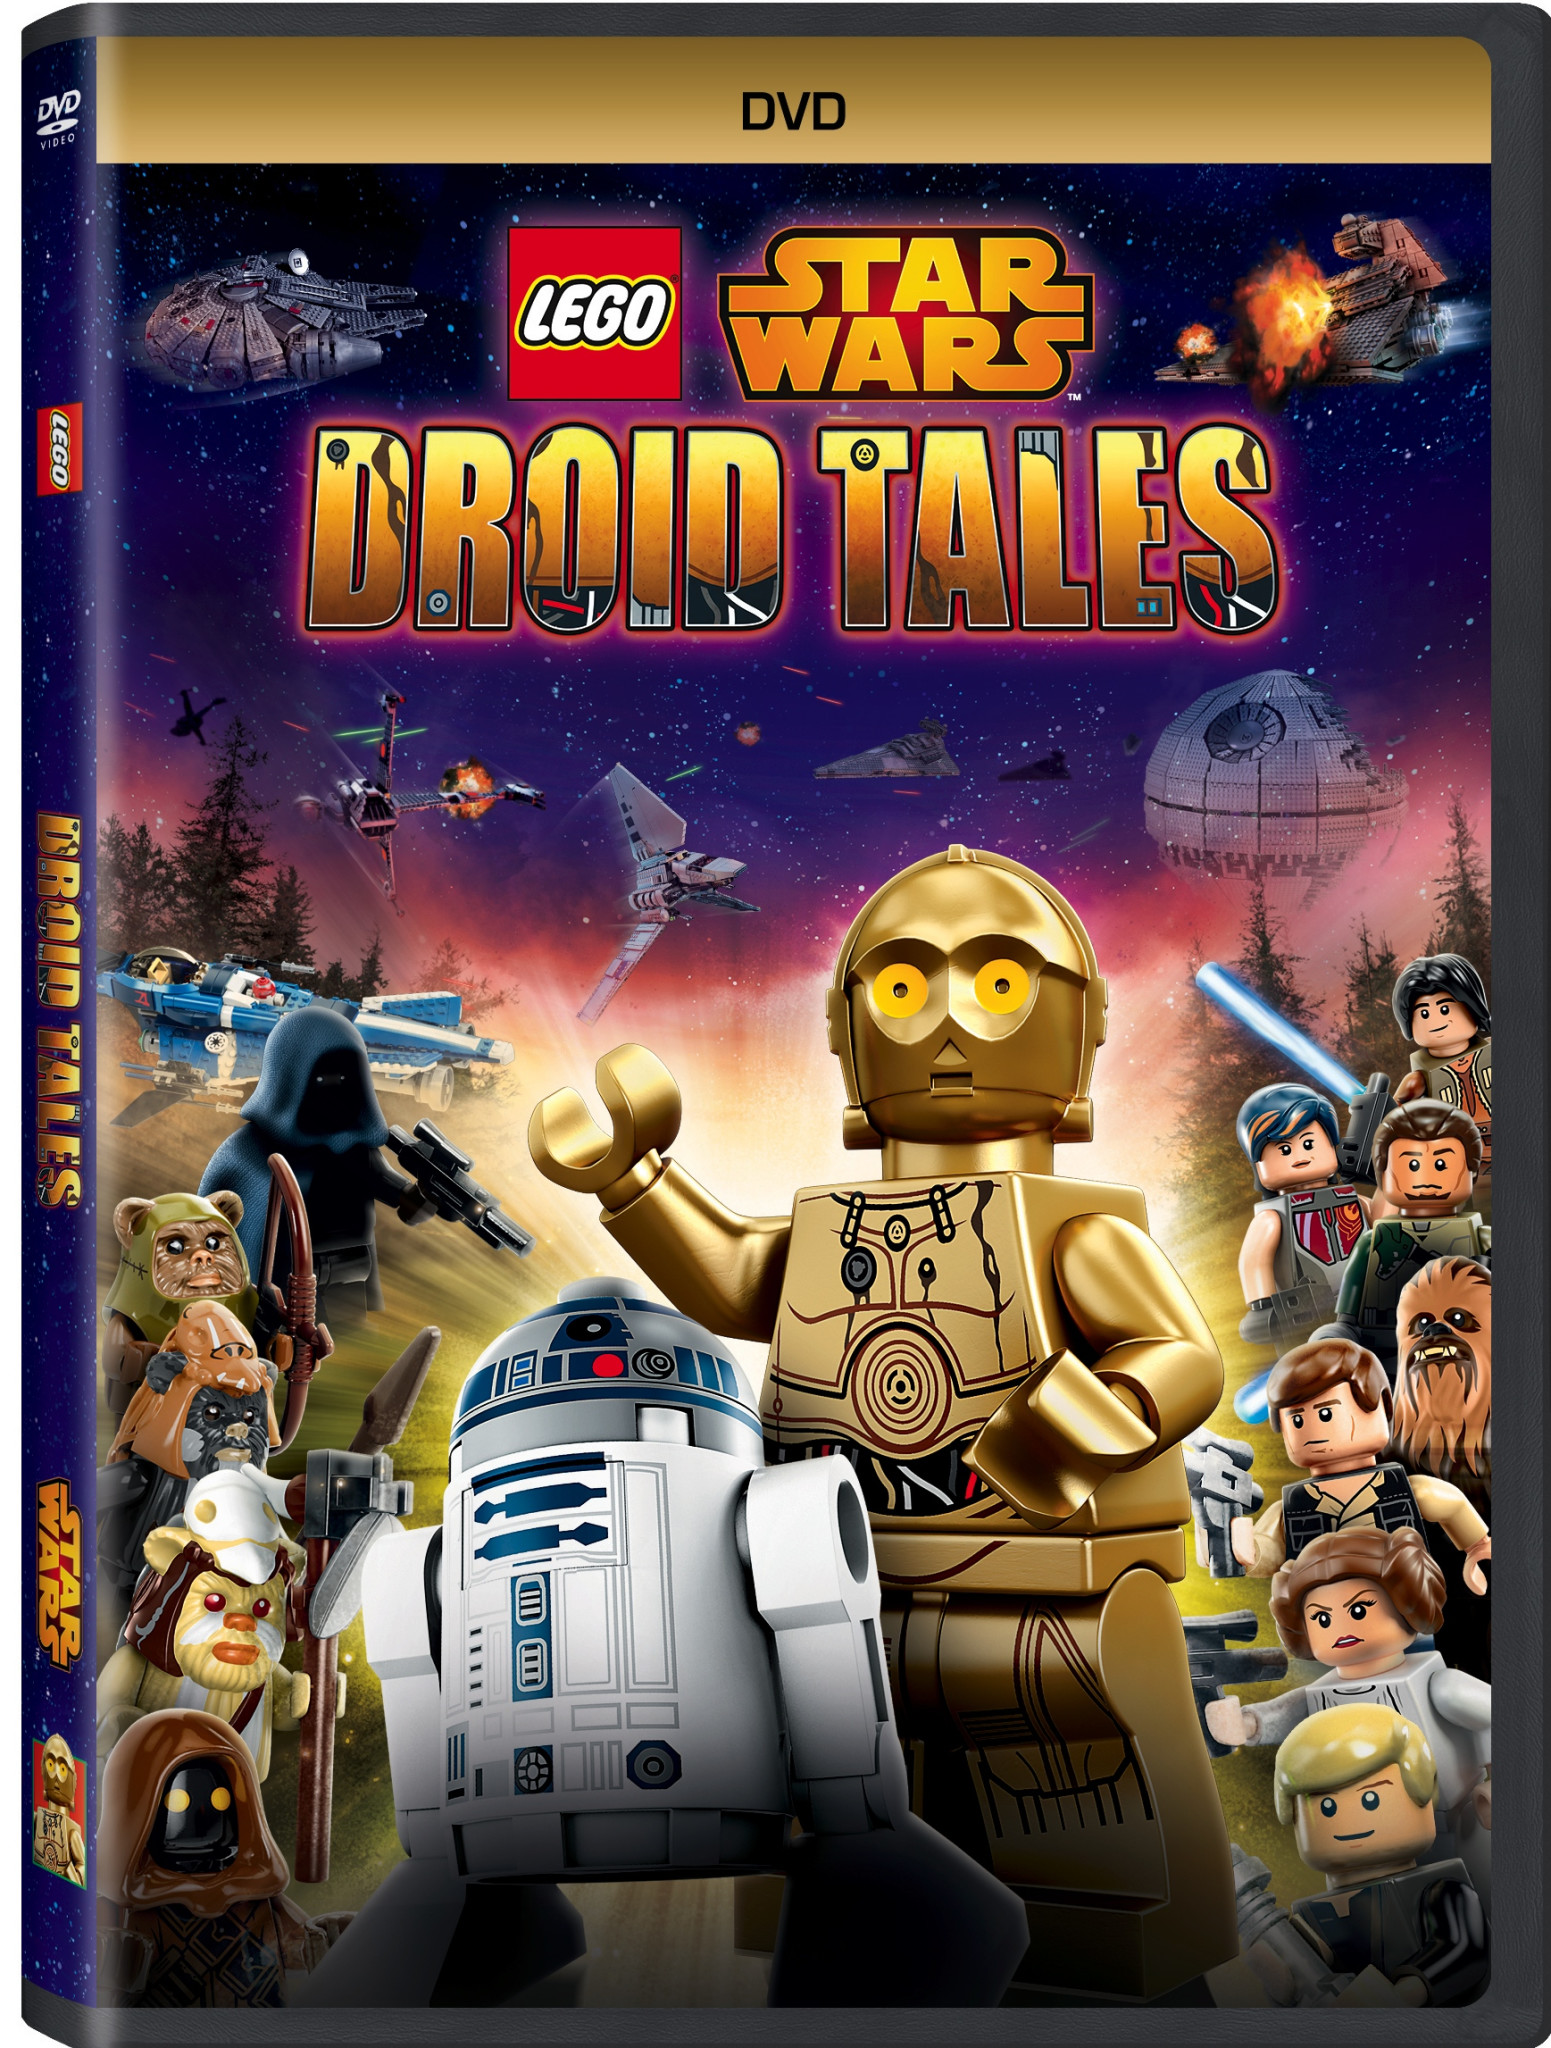 Lego Star Wars: Droid Tales coming to DVD on March 1st 2016